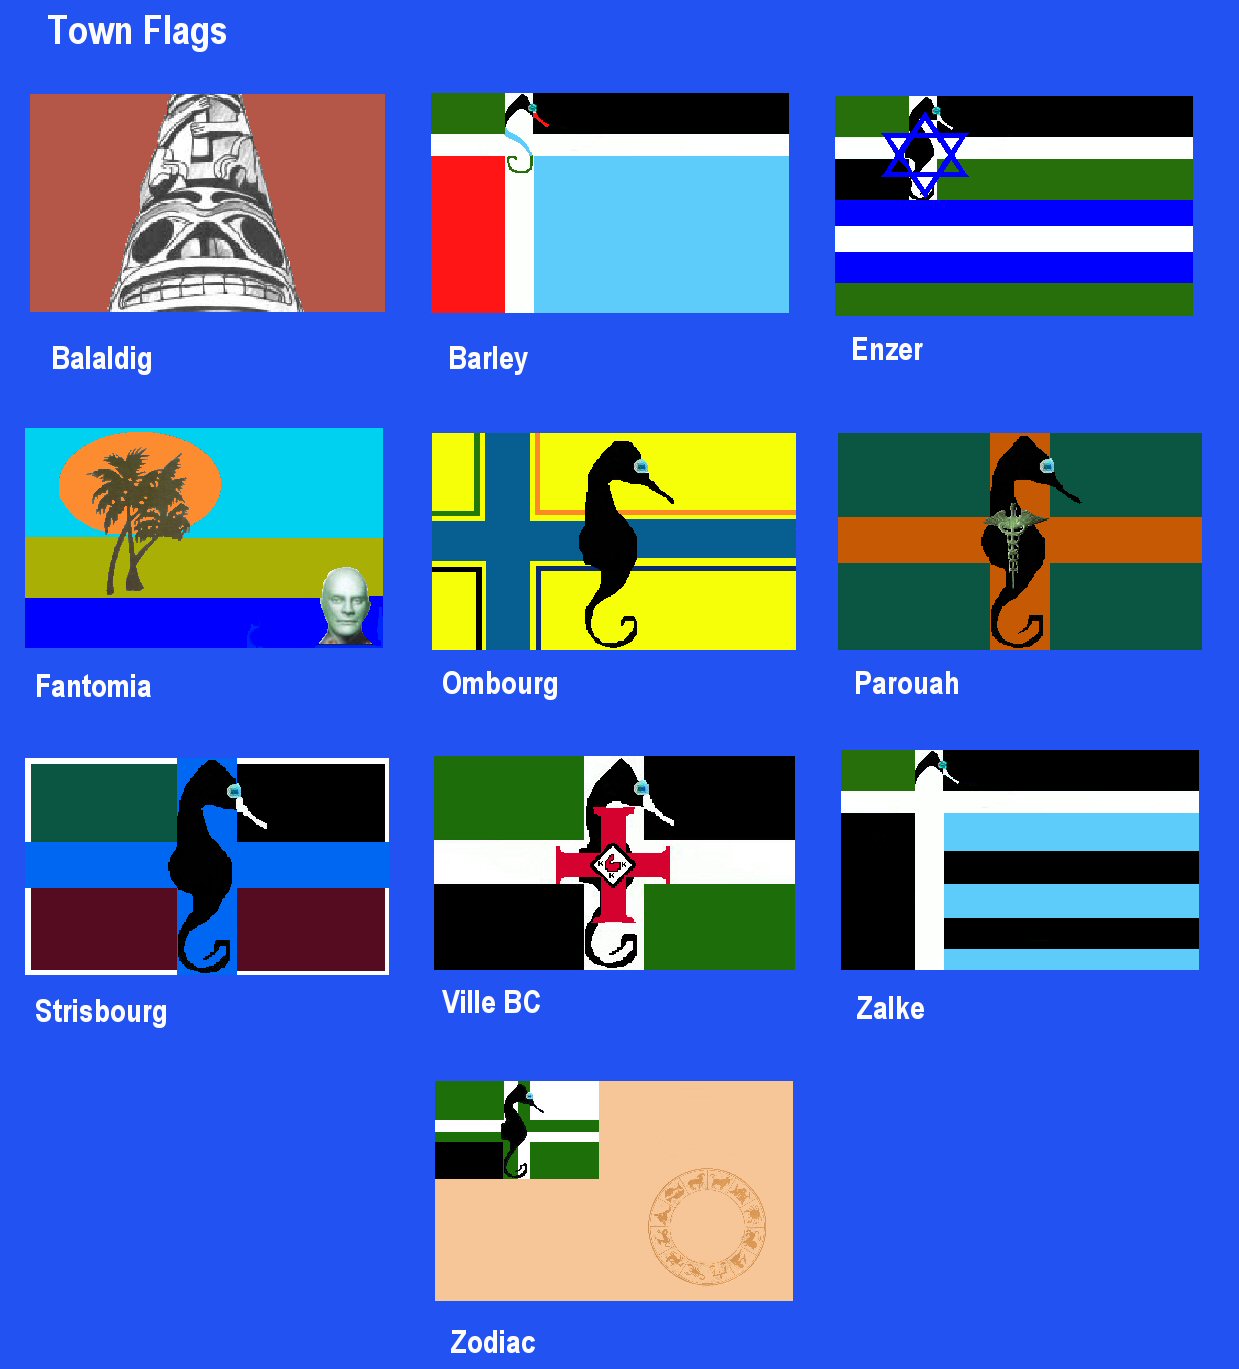 townflags.jpg